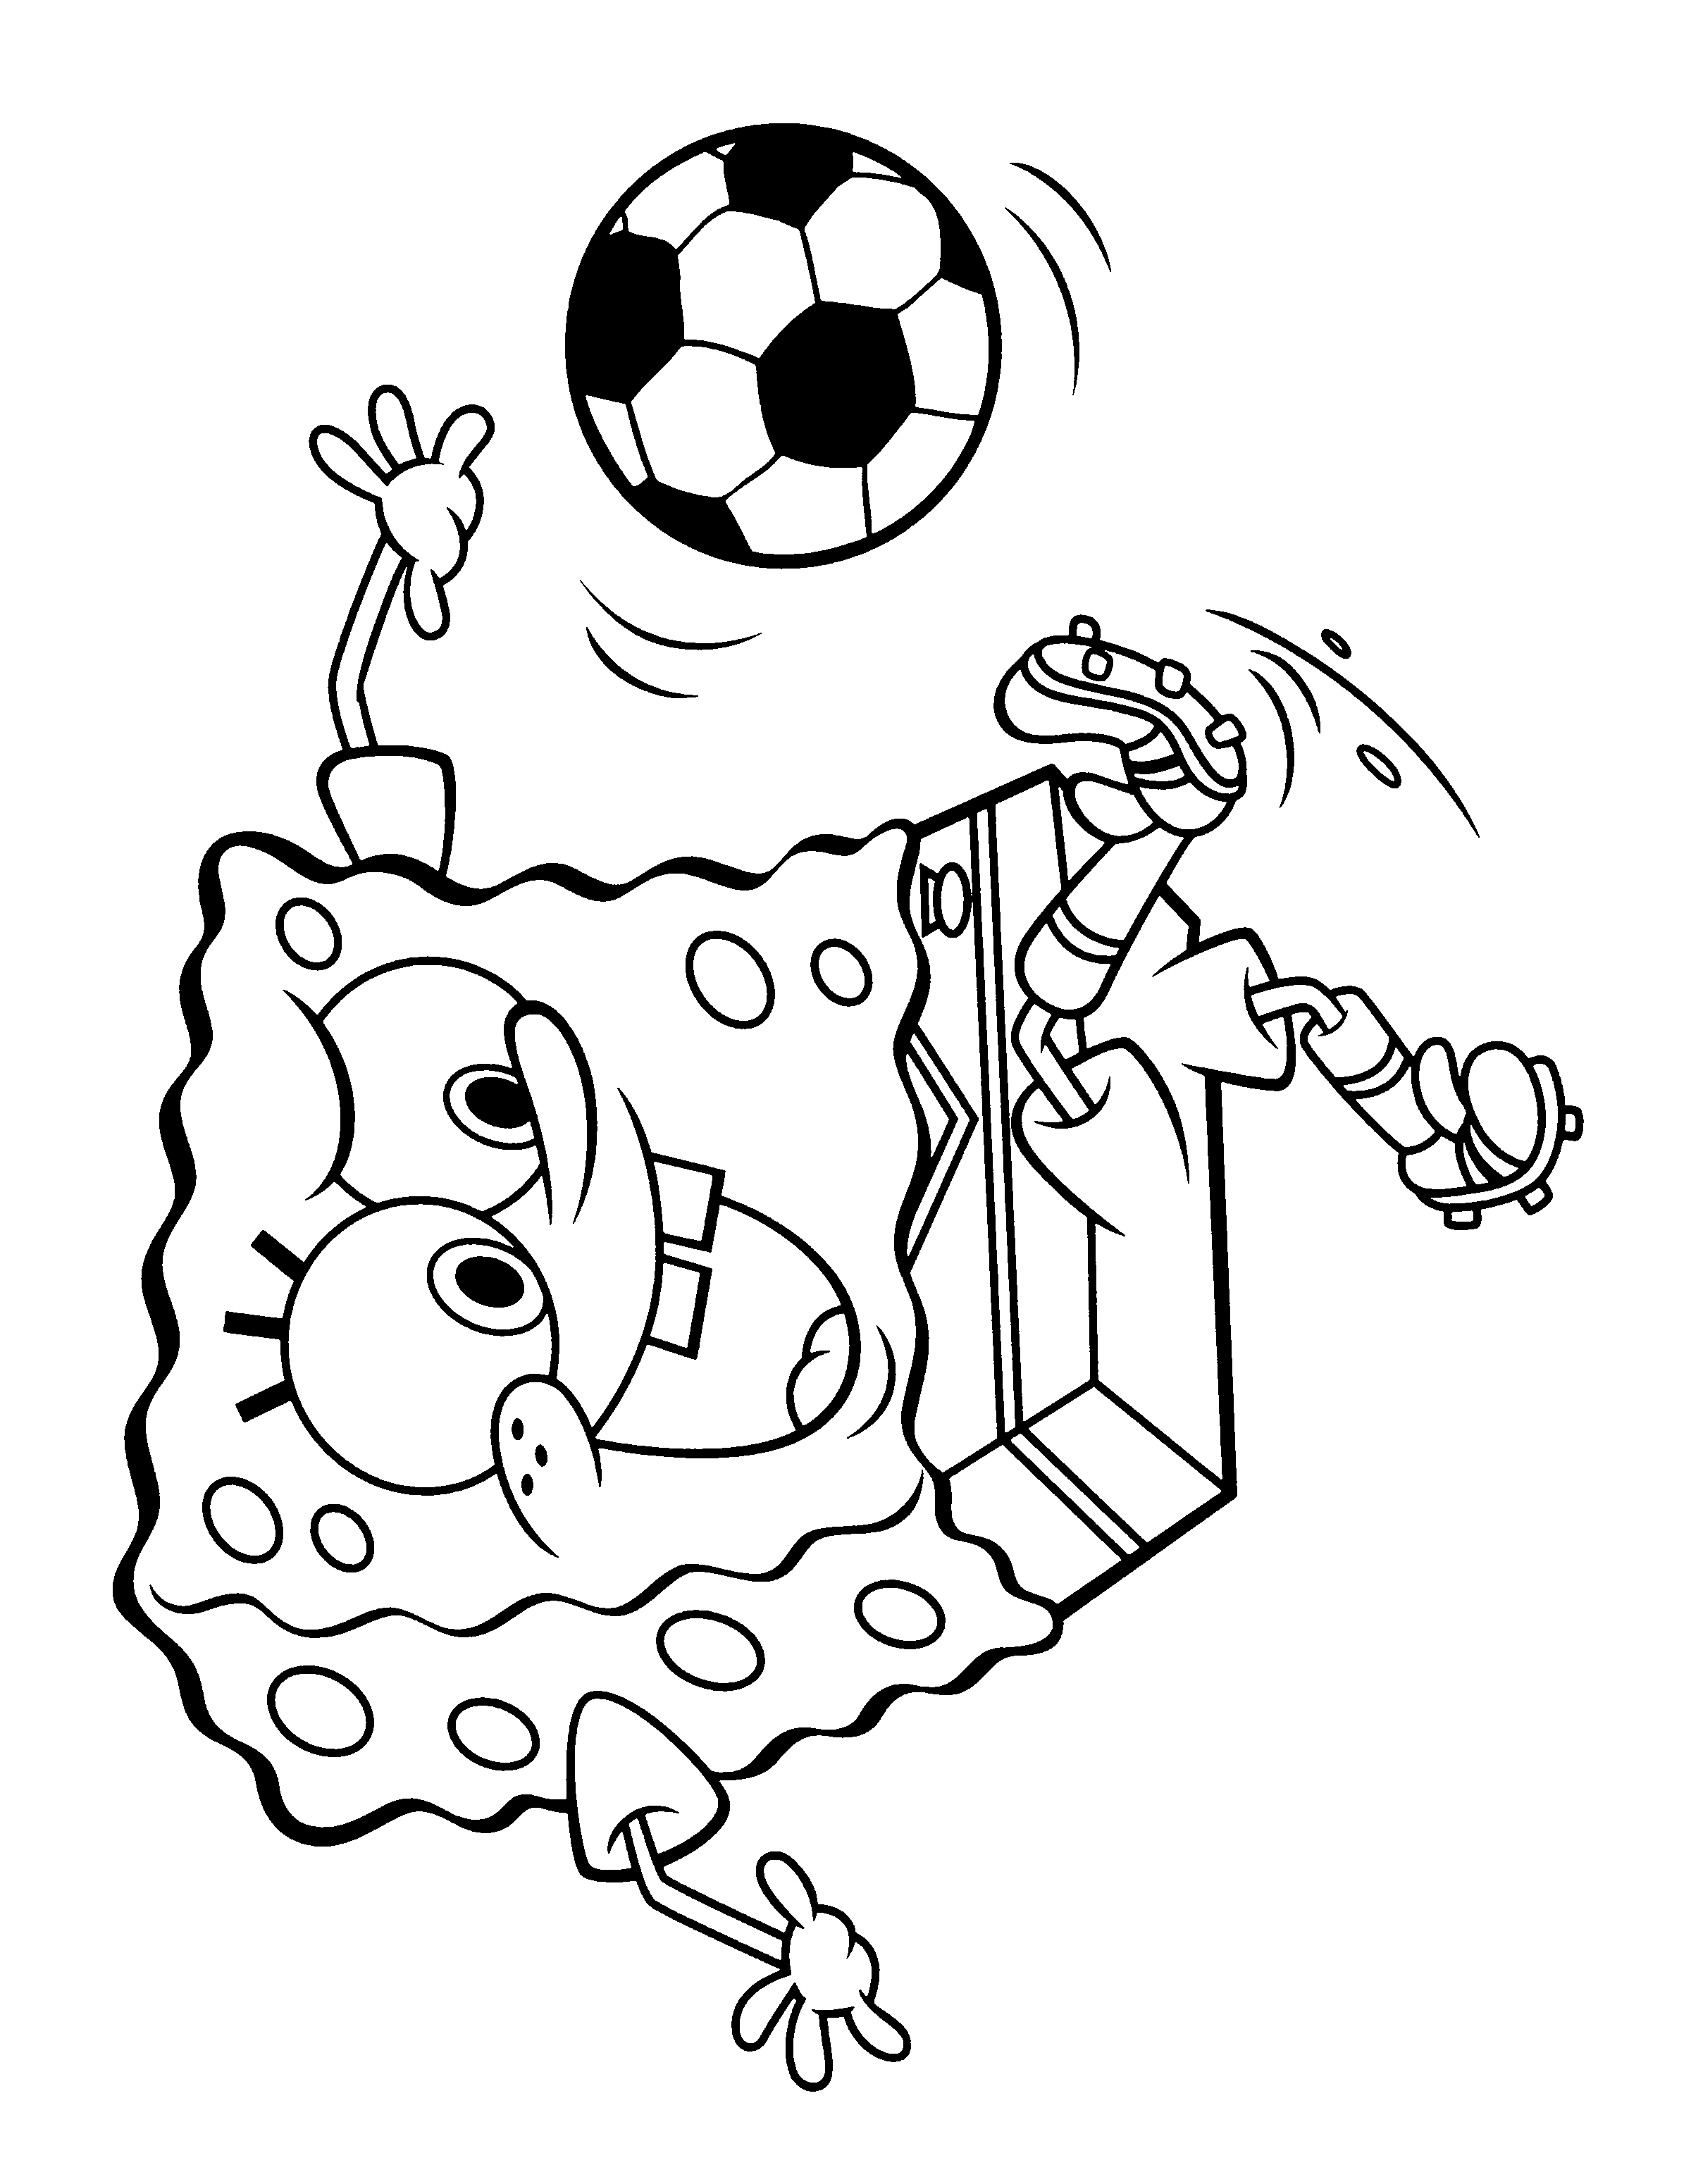 coloring pages of sopngebob - photo #31